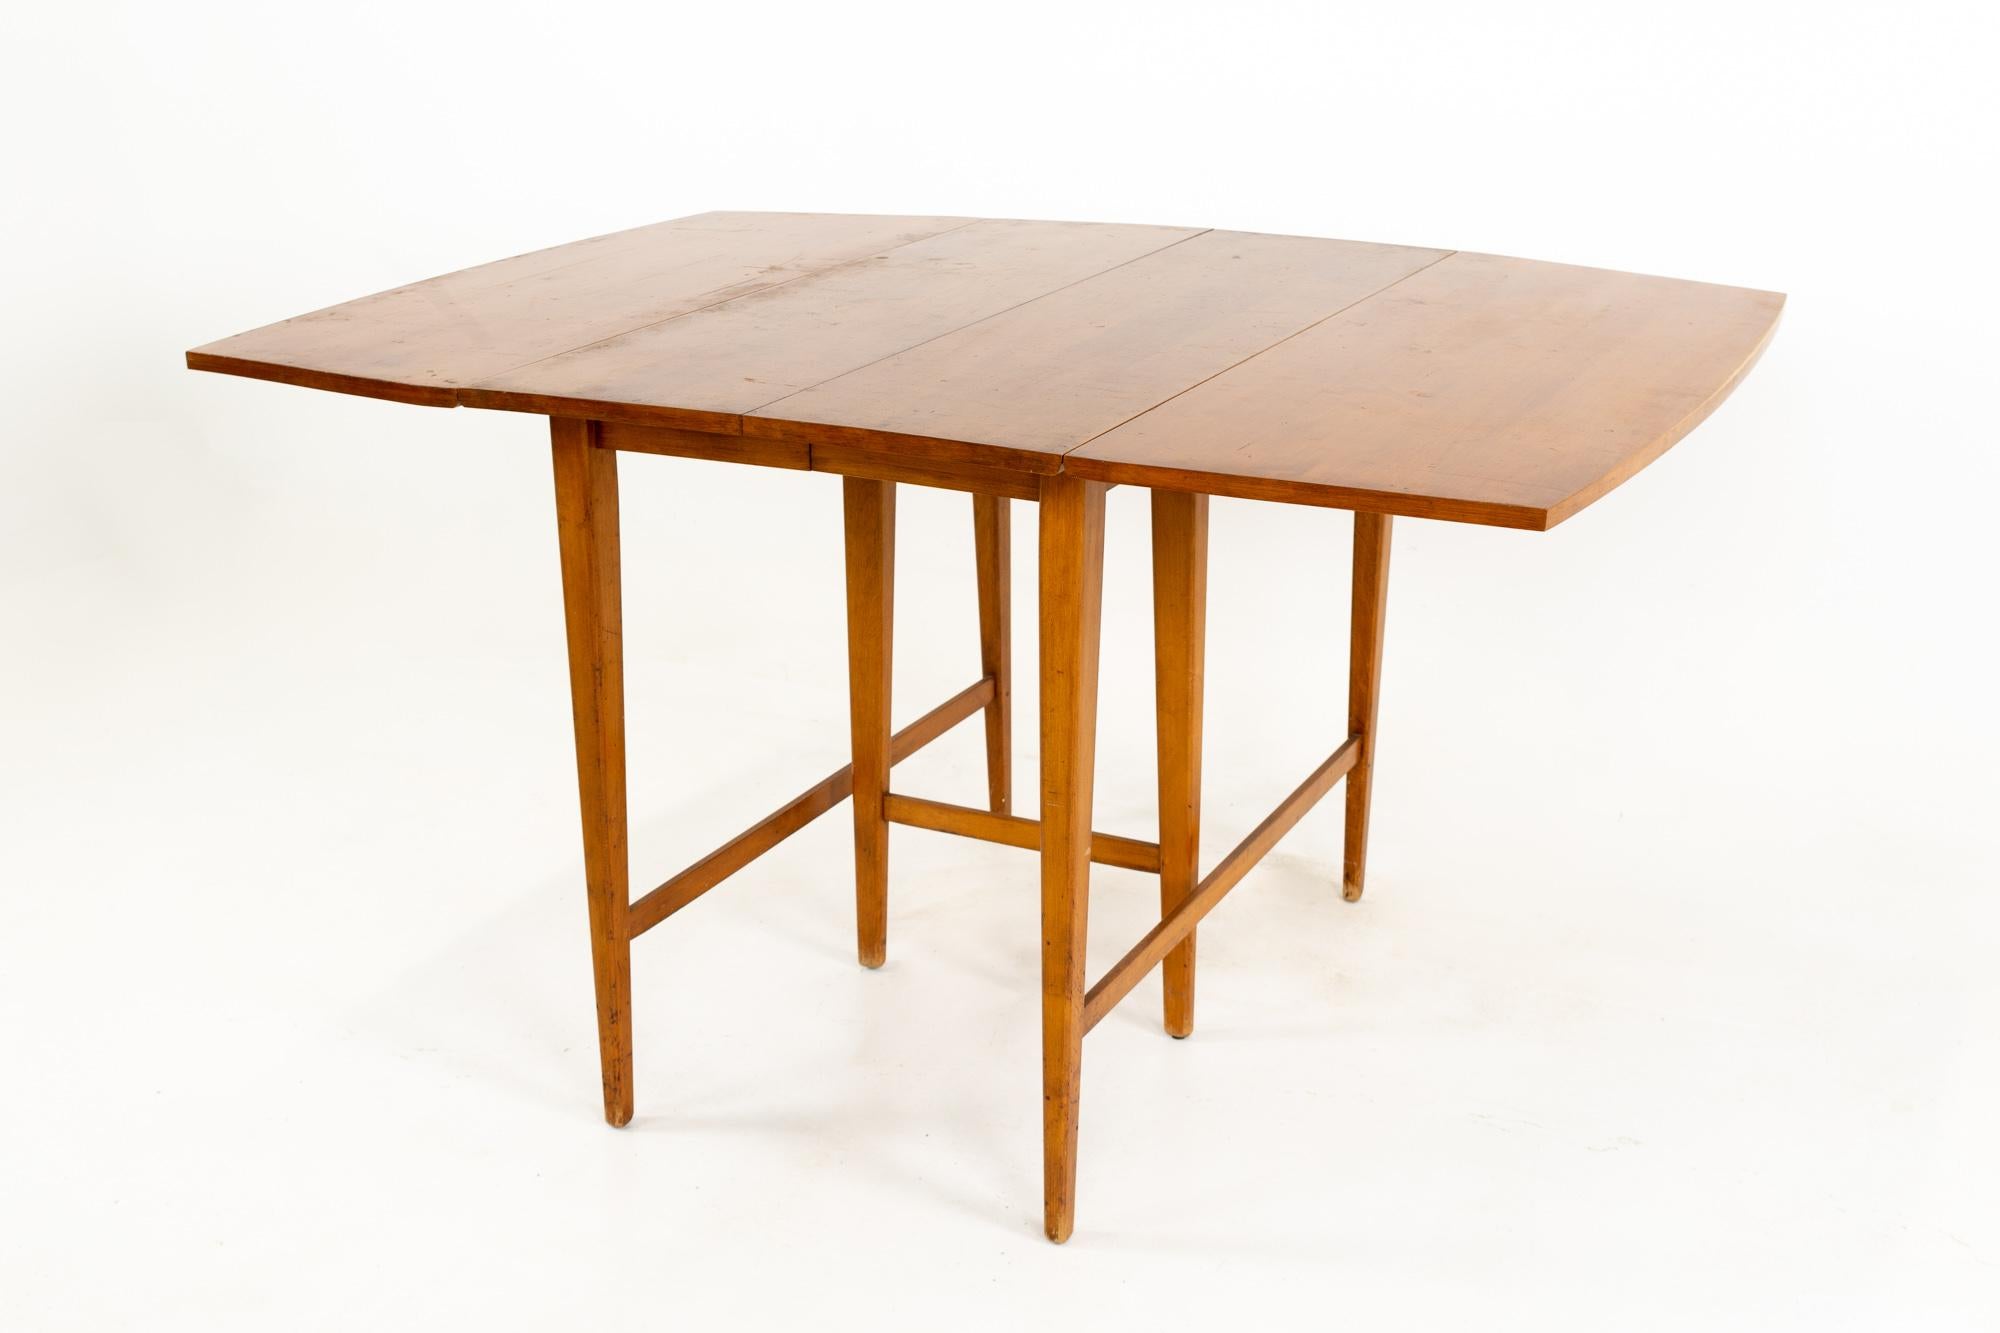 Paul McCobb for Planner Group mid century drop leaf dining table
This table is 52.5 wide x 40 deep x 28.5 inches high

All pieces of furniture can be had in what we call restored vintage condition. That means the piece is restored upon purchase